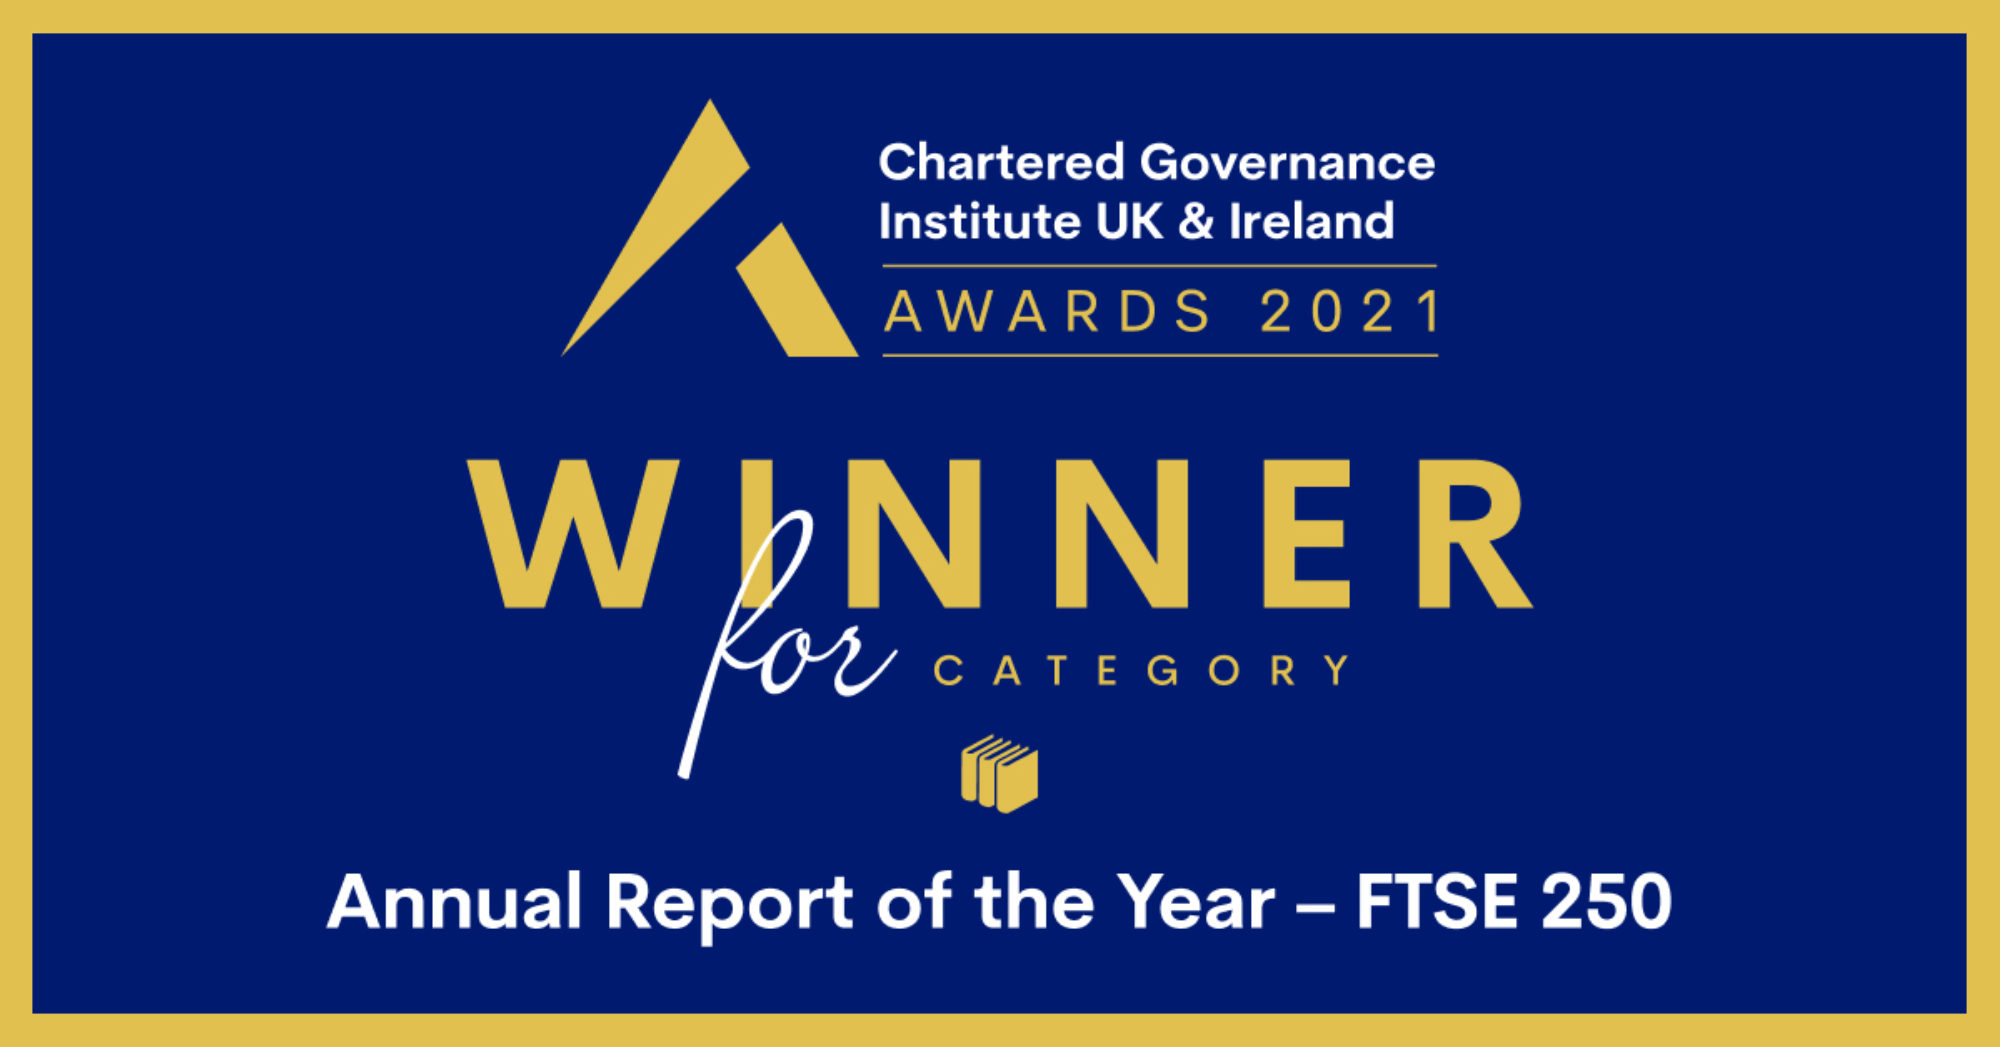 FTSE 250 Annual Report of Year at the CGI Awards